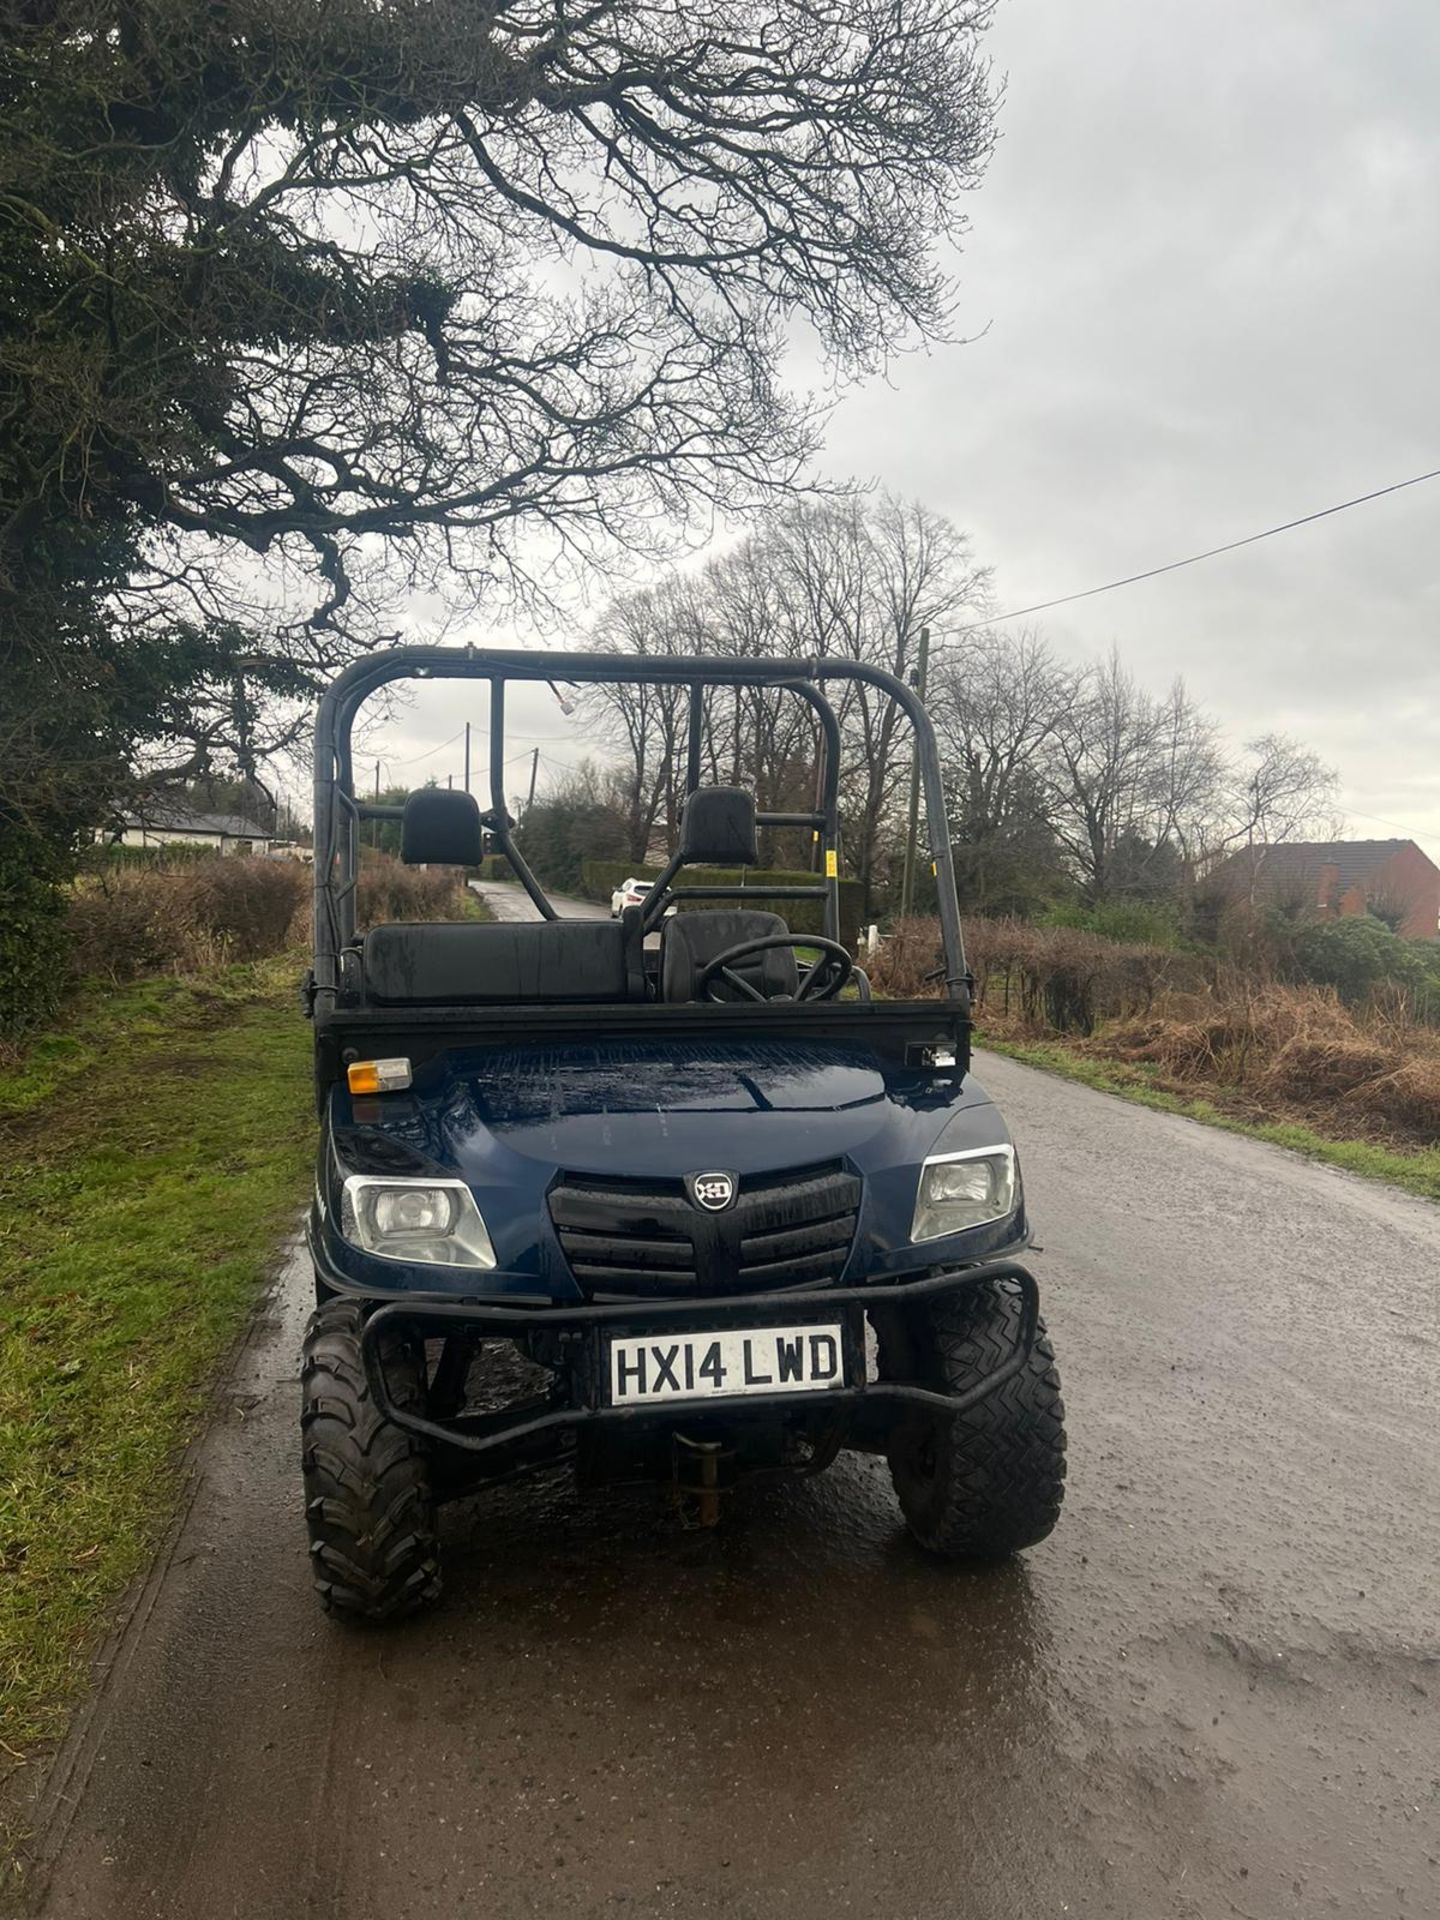 2014 CUSHMAN 1000cc FARM BUGGY 4x4 ROAD REGISTERED, RUNS AND DRIVES, 870 RECORDED HOURS *PLUS VAT* - Image 2 of 7